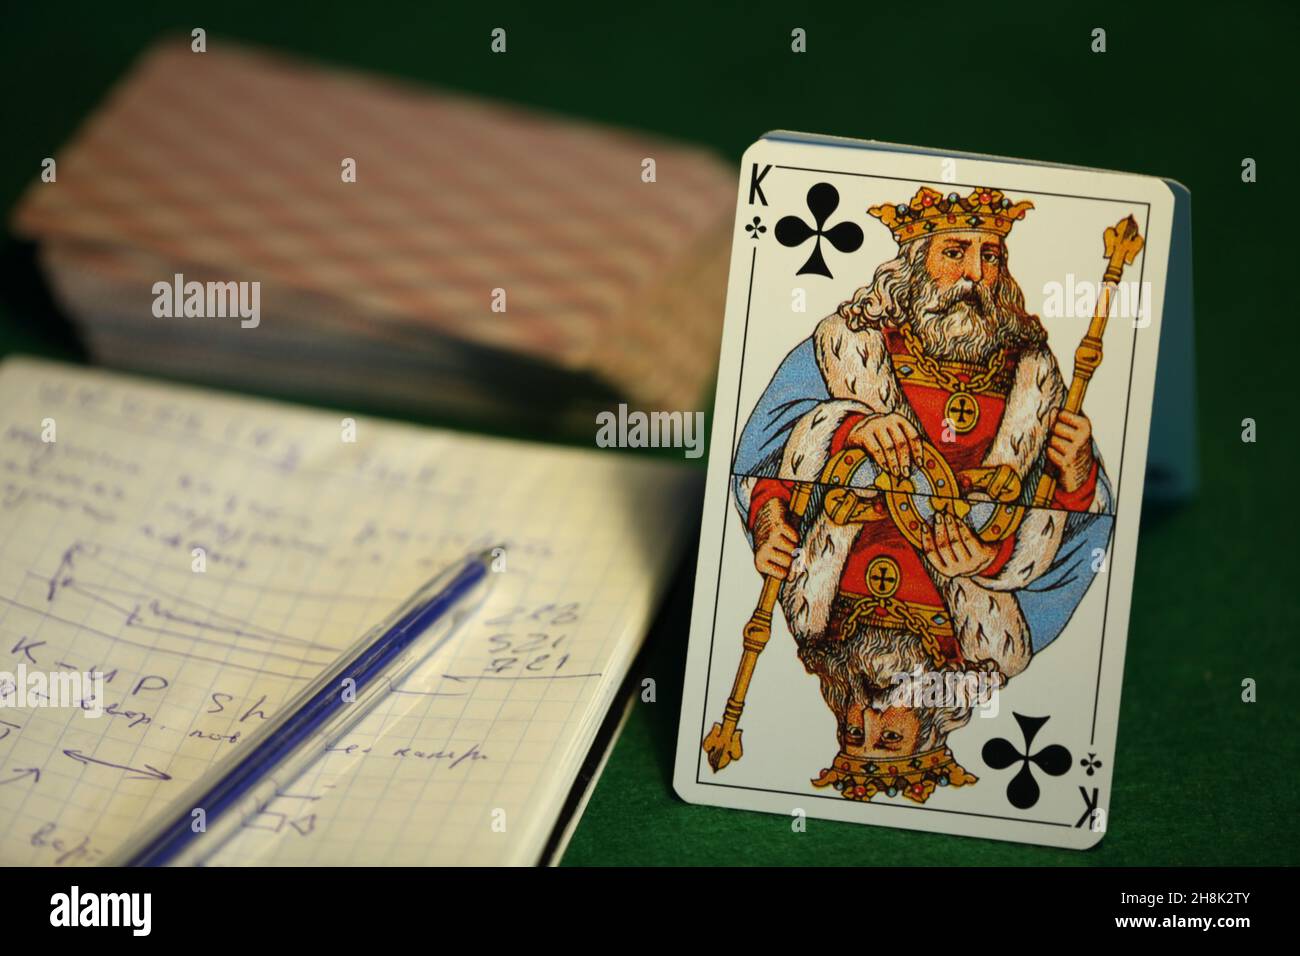 king of cross, deck of cards, paper with notes on a green cloth, card game for money, still life Stock Photo